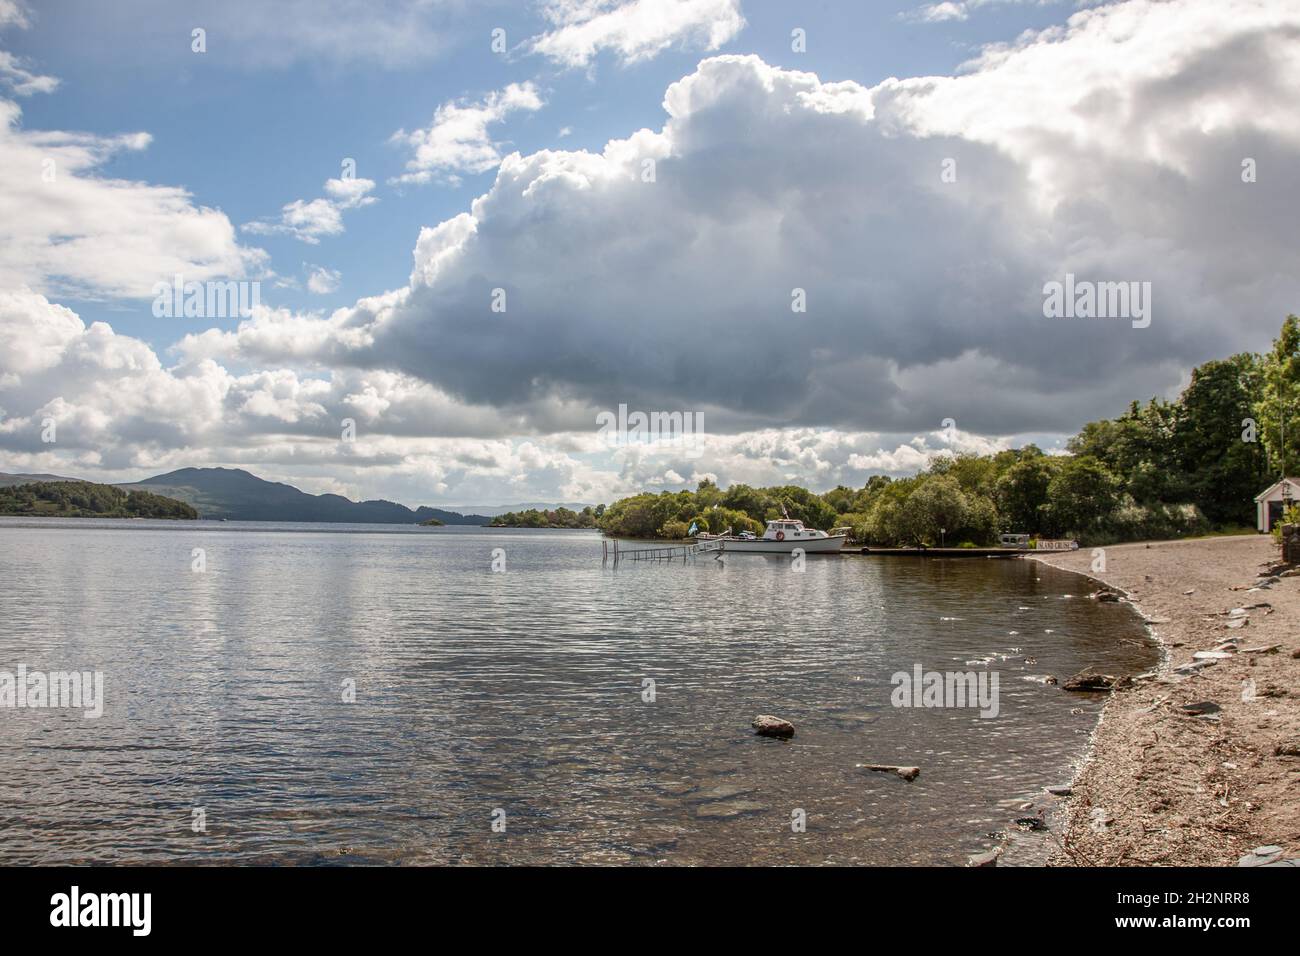 View of Loch Lomond at Luss, Argyll and Bute, Scotland Stock Photo